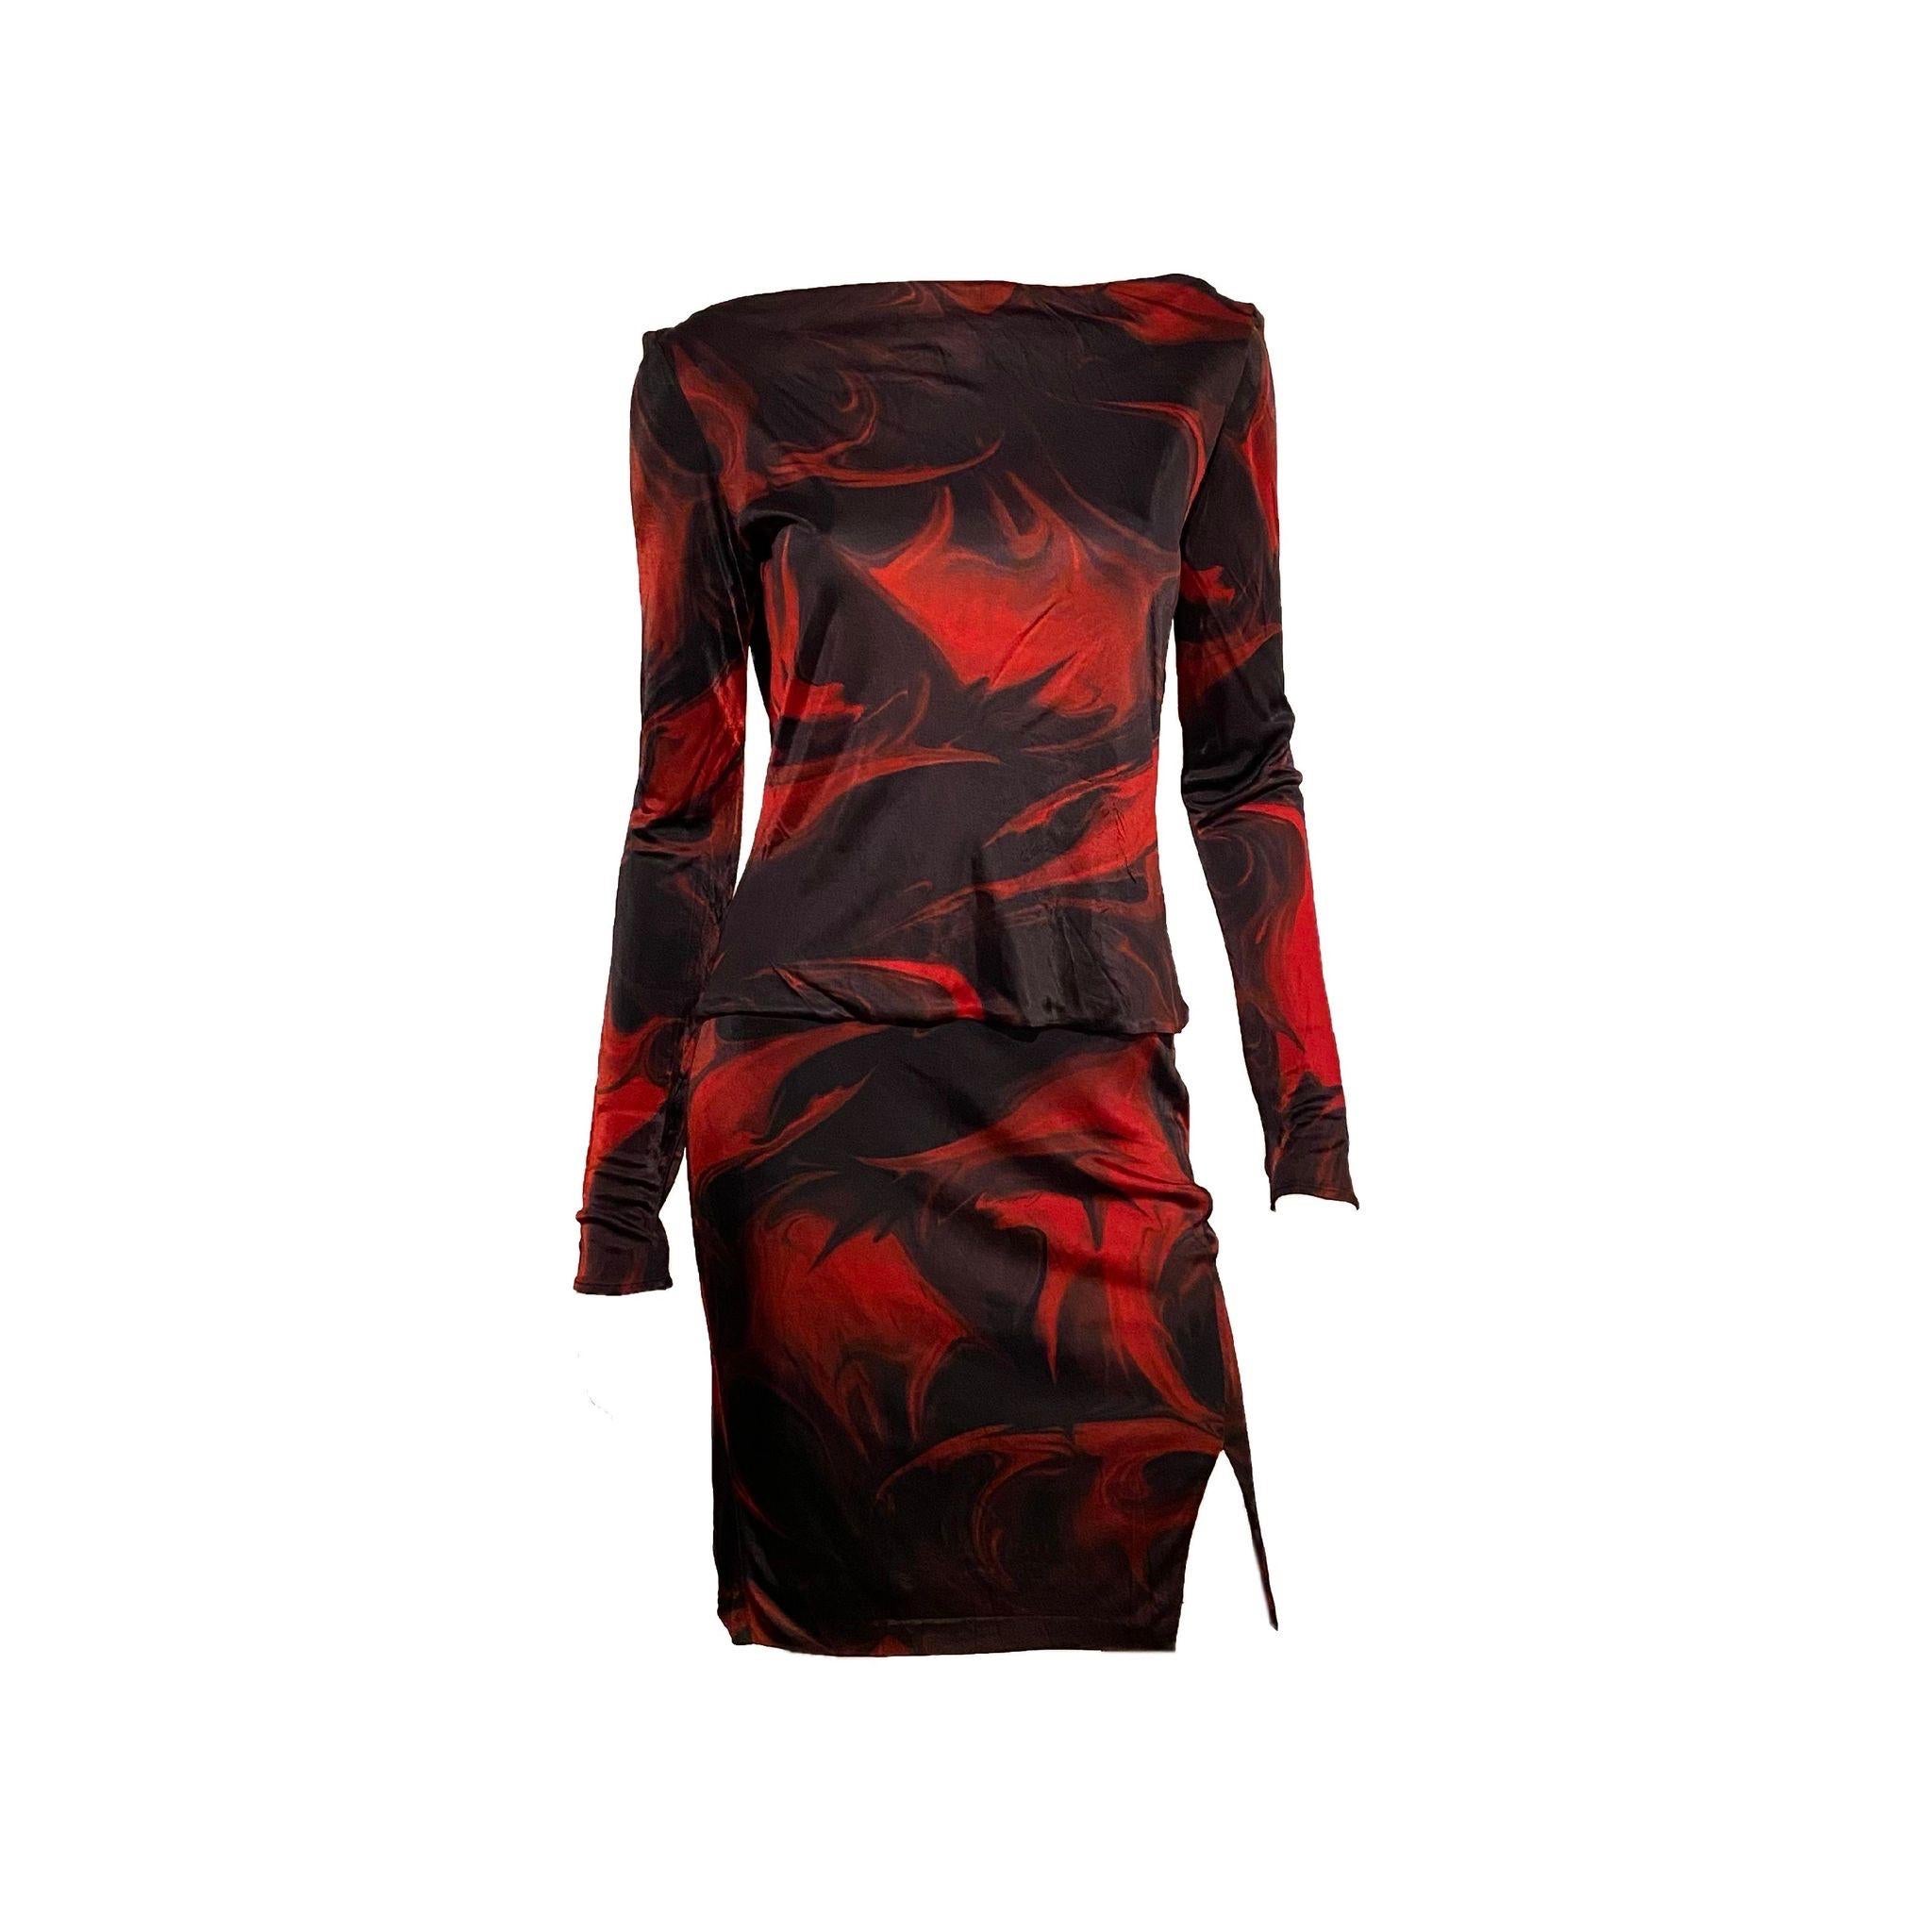 Tom Ford Era Gucci Two-piece Set with low back top plus matching mini skirt with side slit, featuring a red/black graphic swirl print from the Men’s Spring/Summer 2001 collection

100% viscose, Made in Italy

Size IT 40 


Top:
Bust - 108 cm / 42.5